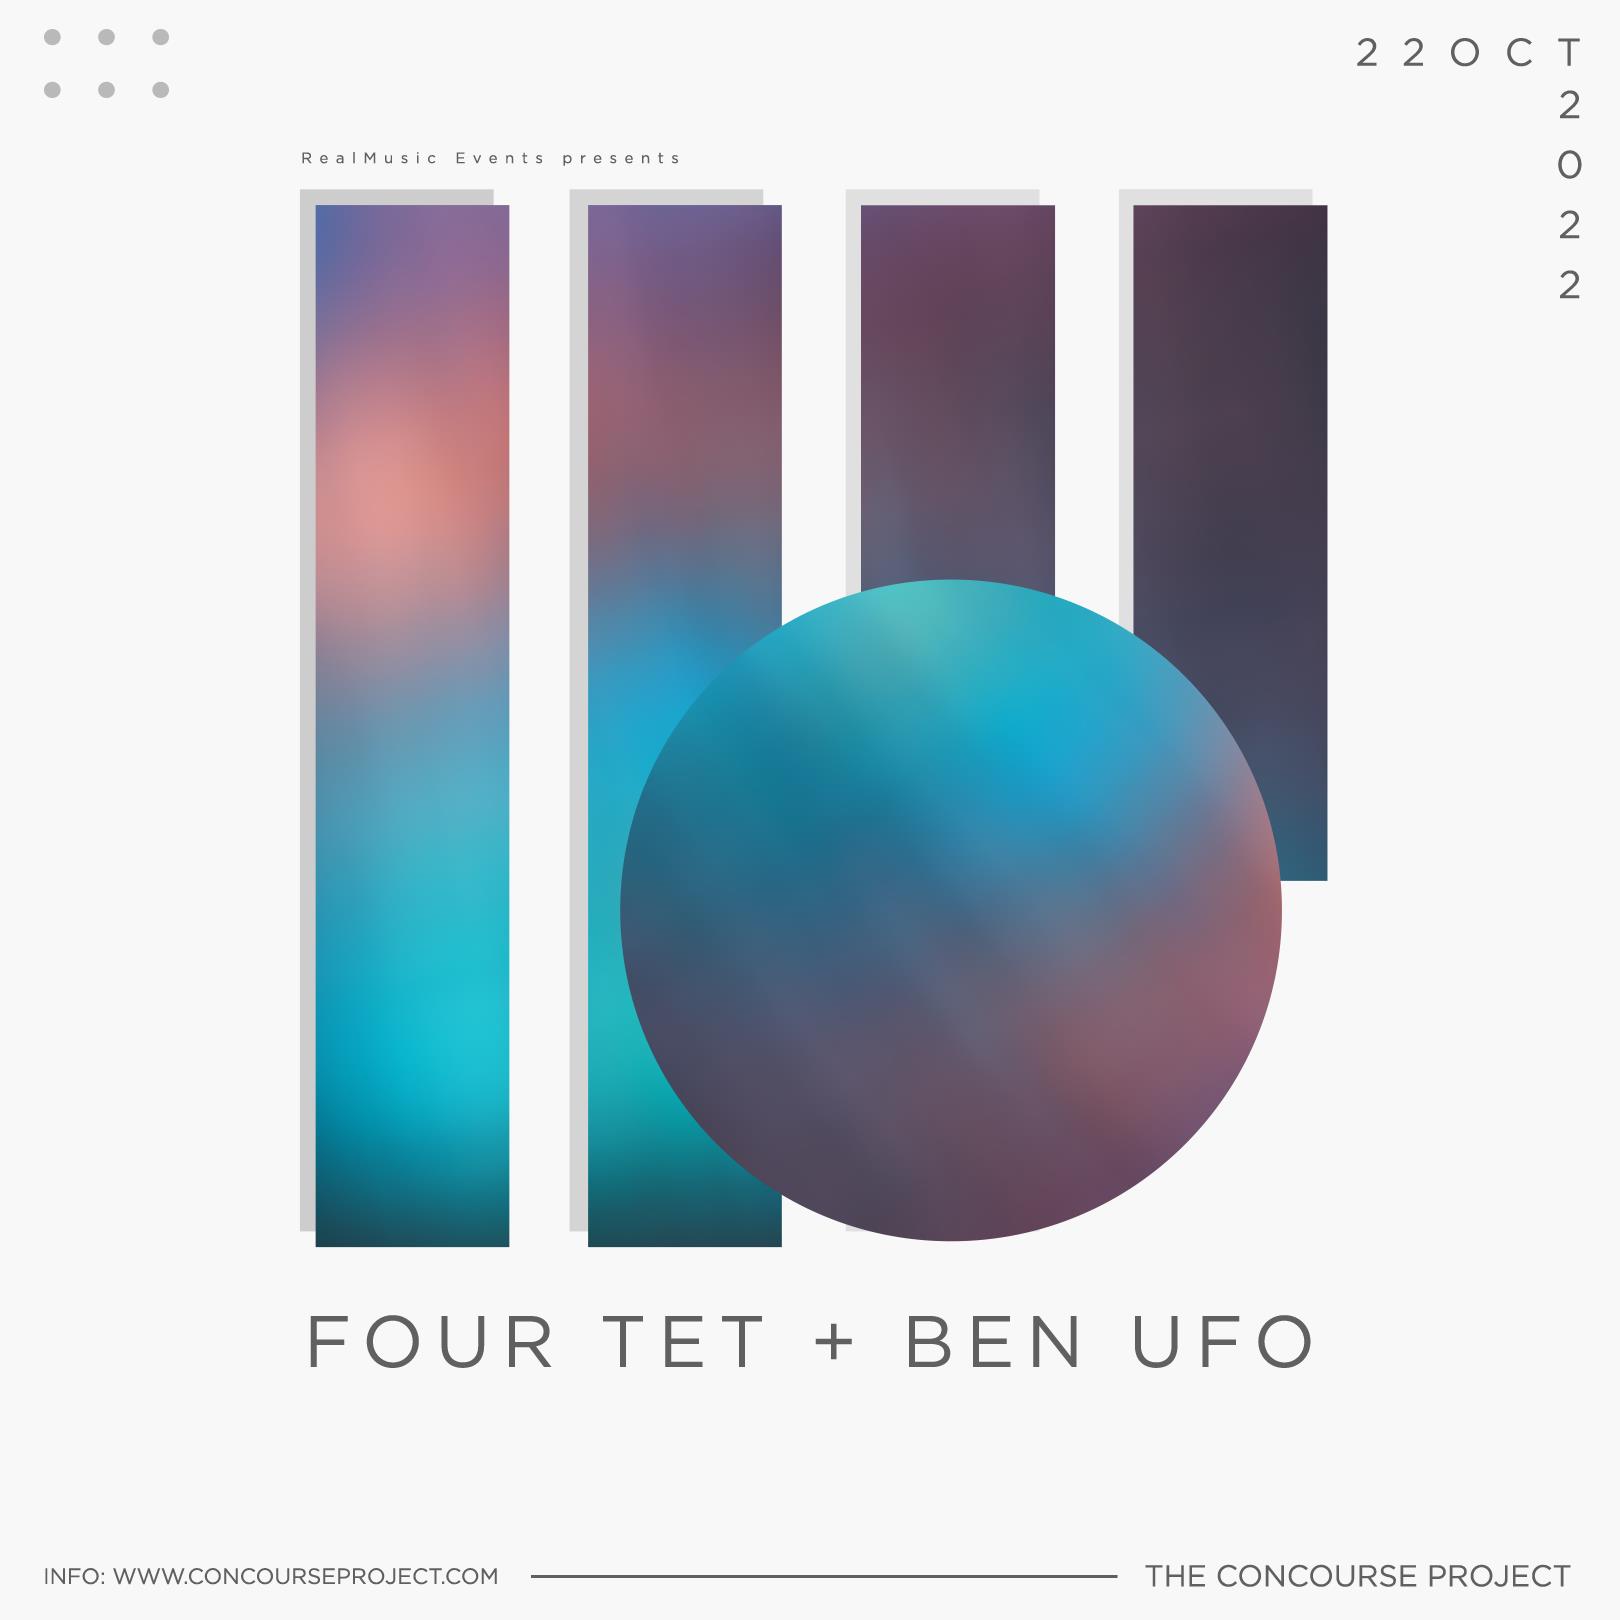 Four Tet + Ben UFO at The Concourse Project